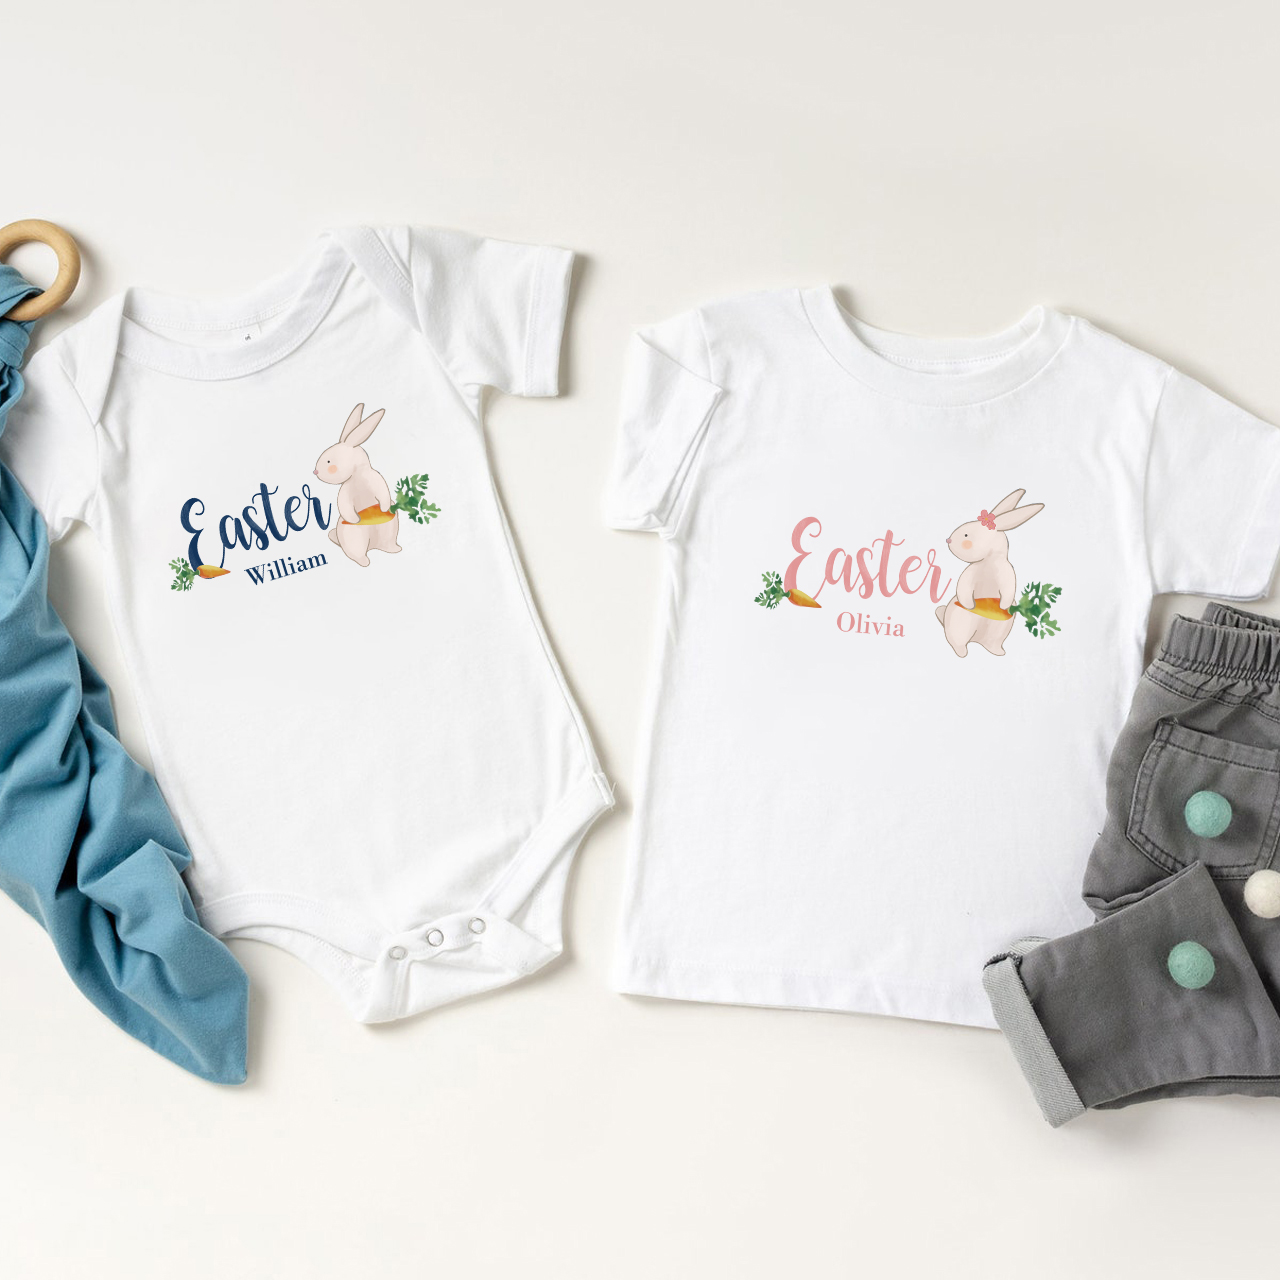 Personalized Baby Bodysuit & Shirts  (Rabbit And Carrot)